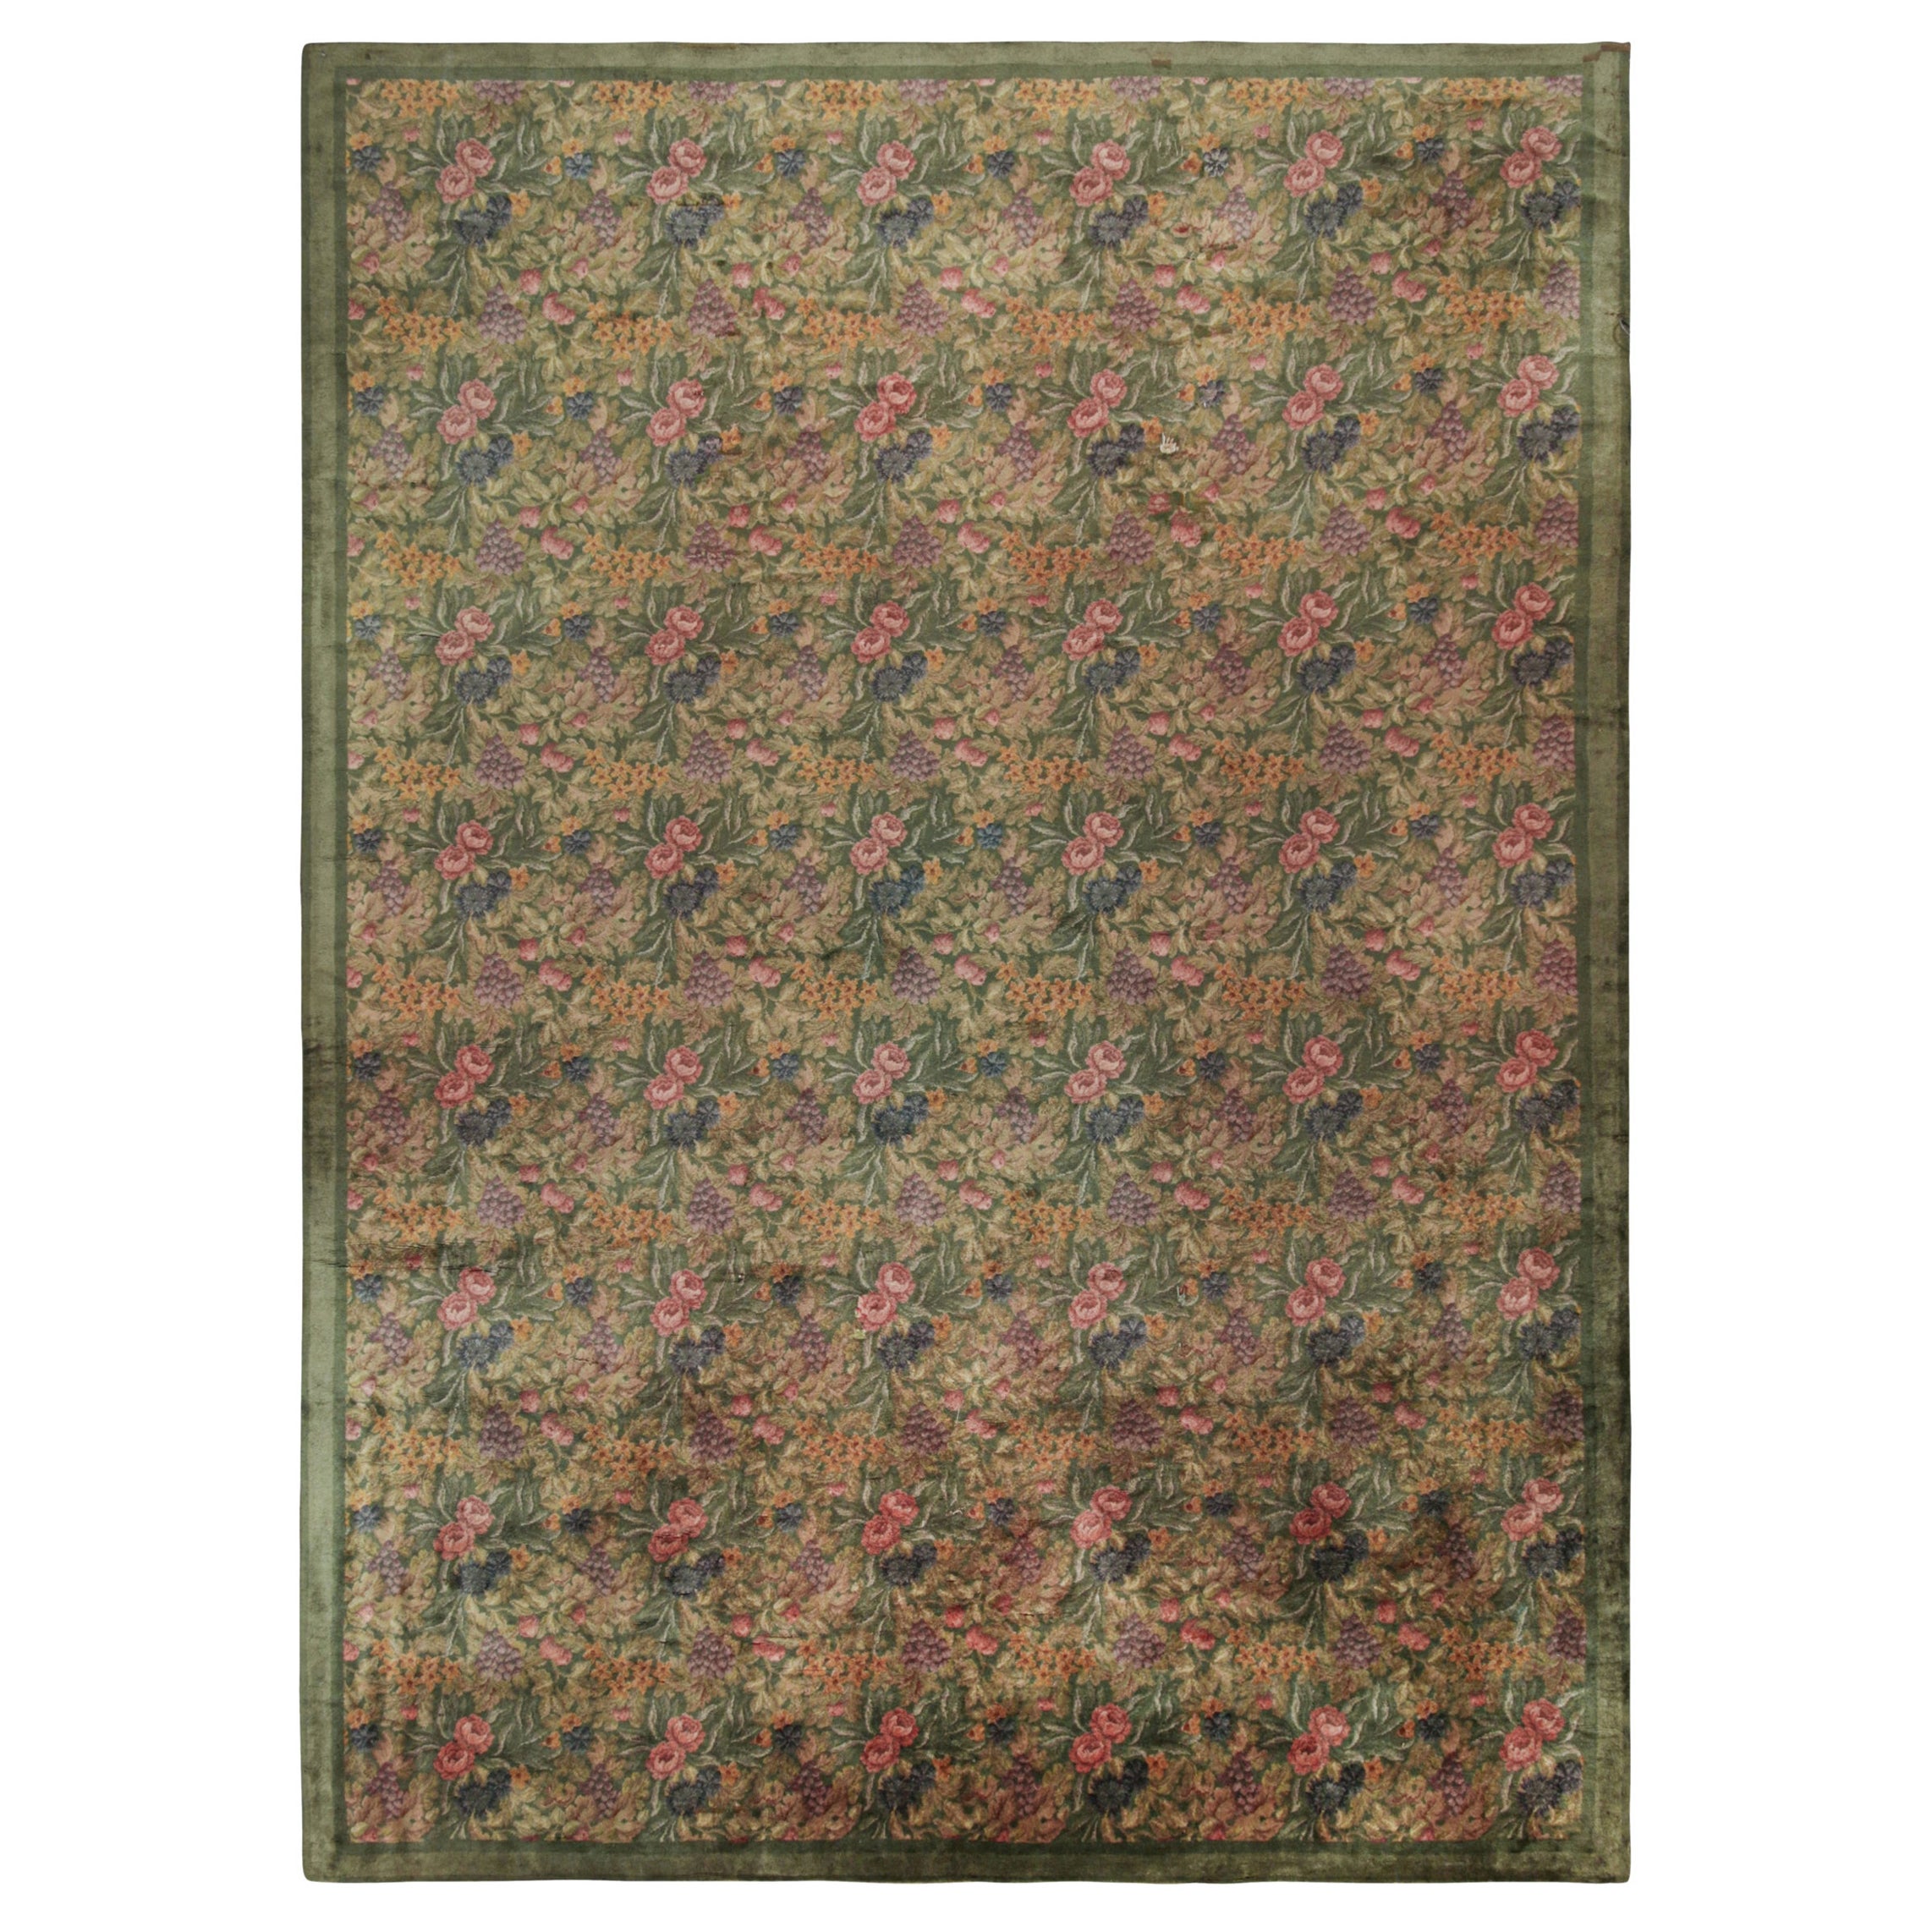 Antique English Axminster rug in Green with Pink Floral Design